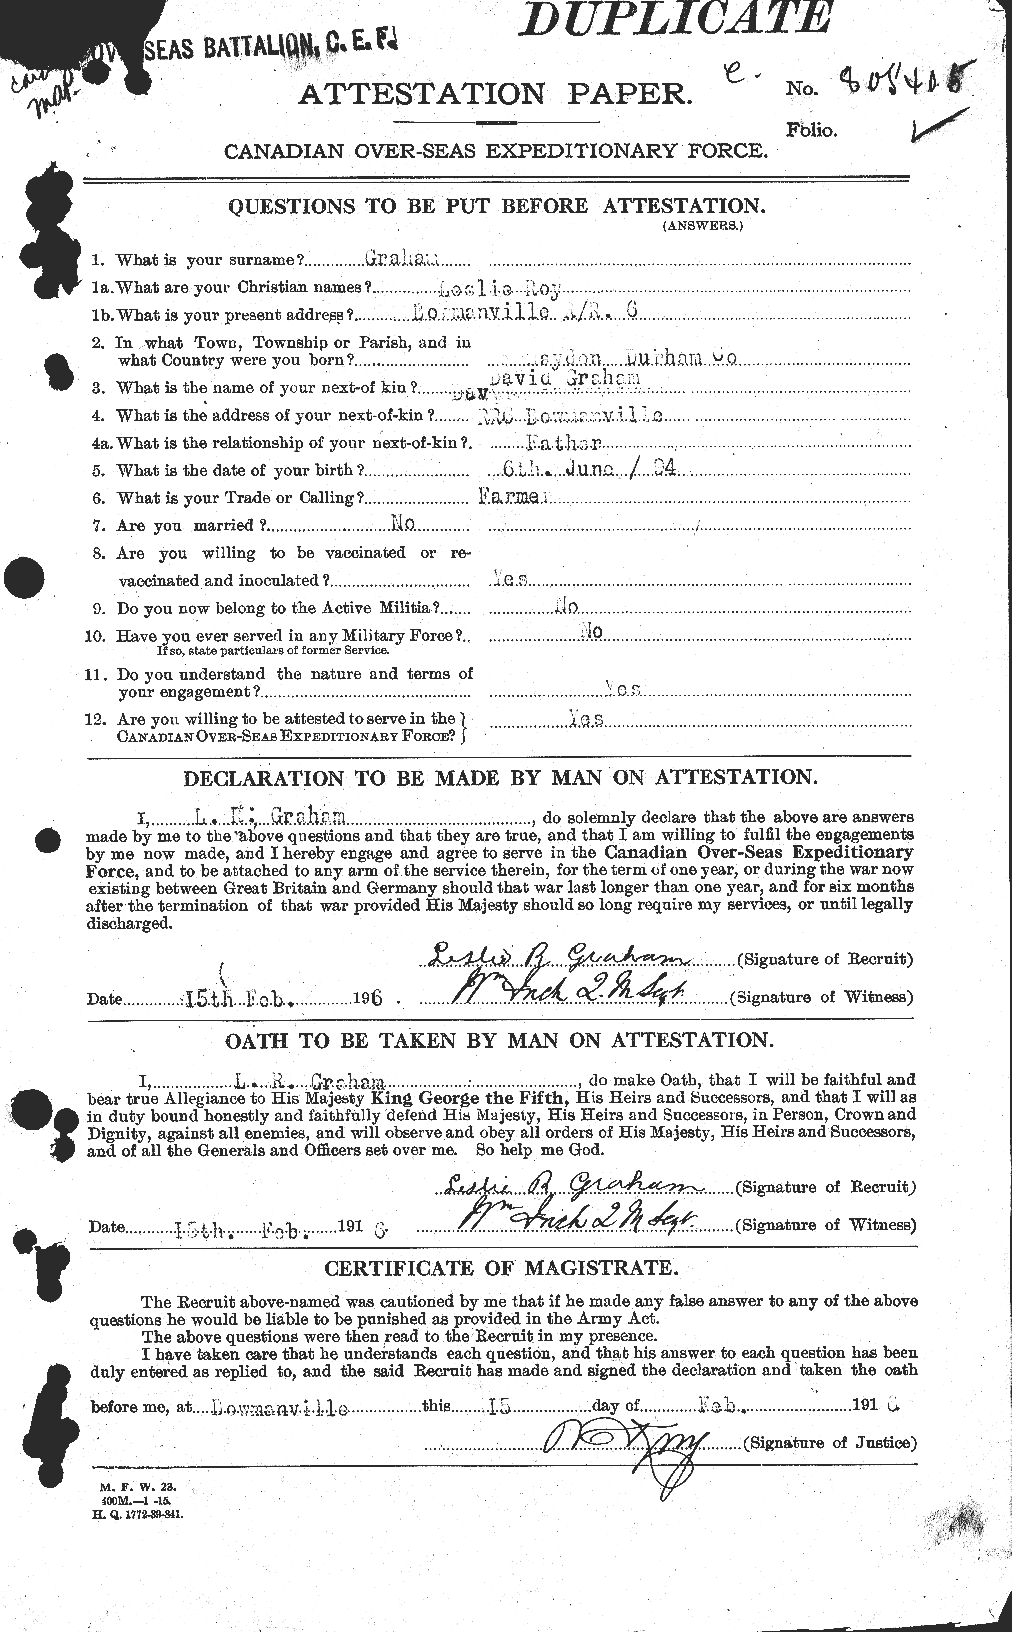 Personnel Records of the First World War - CEF 359273a